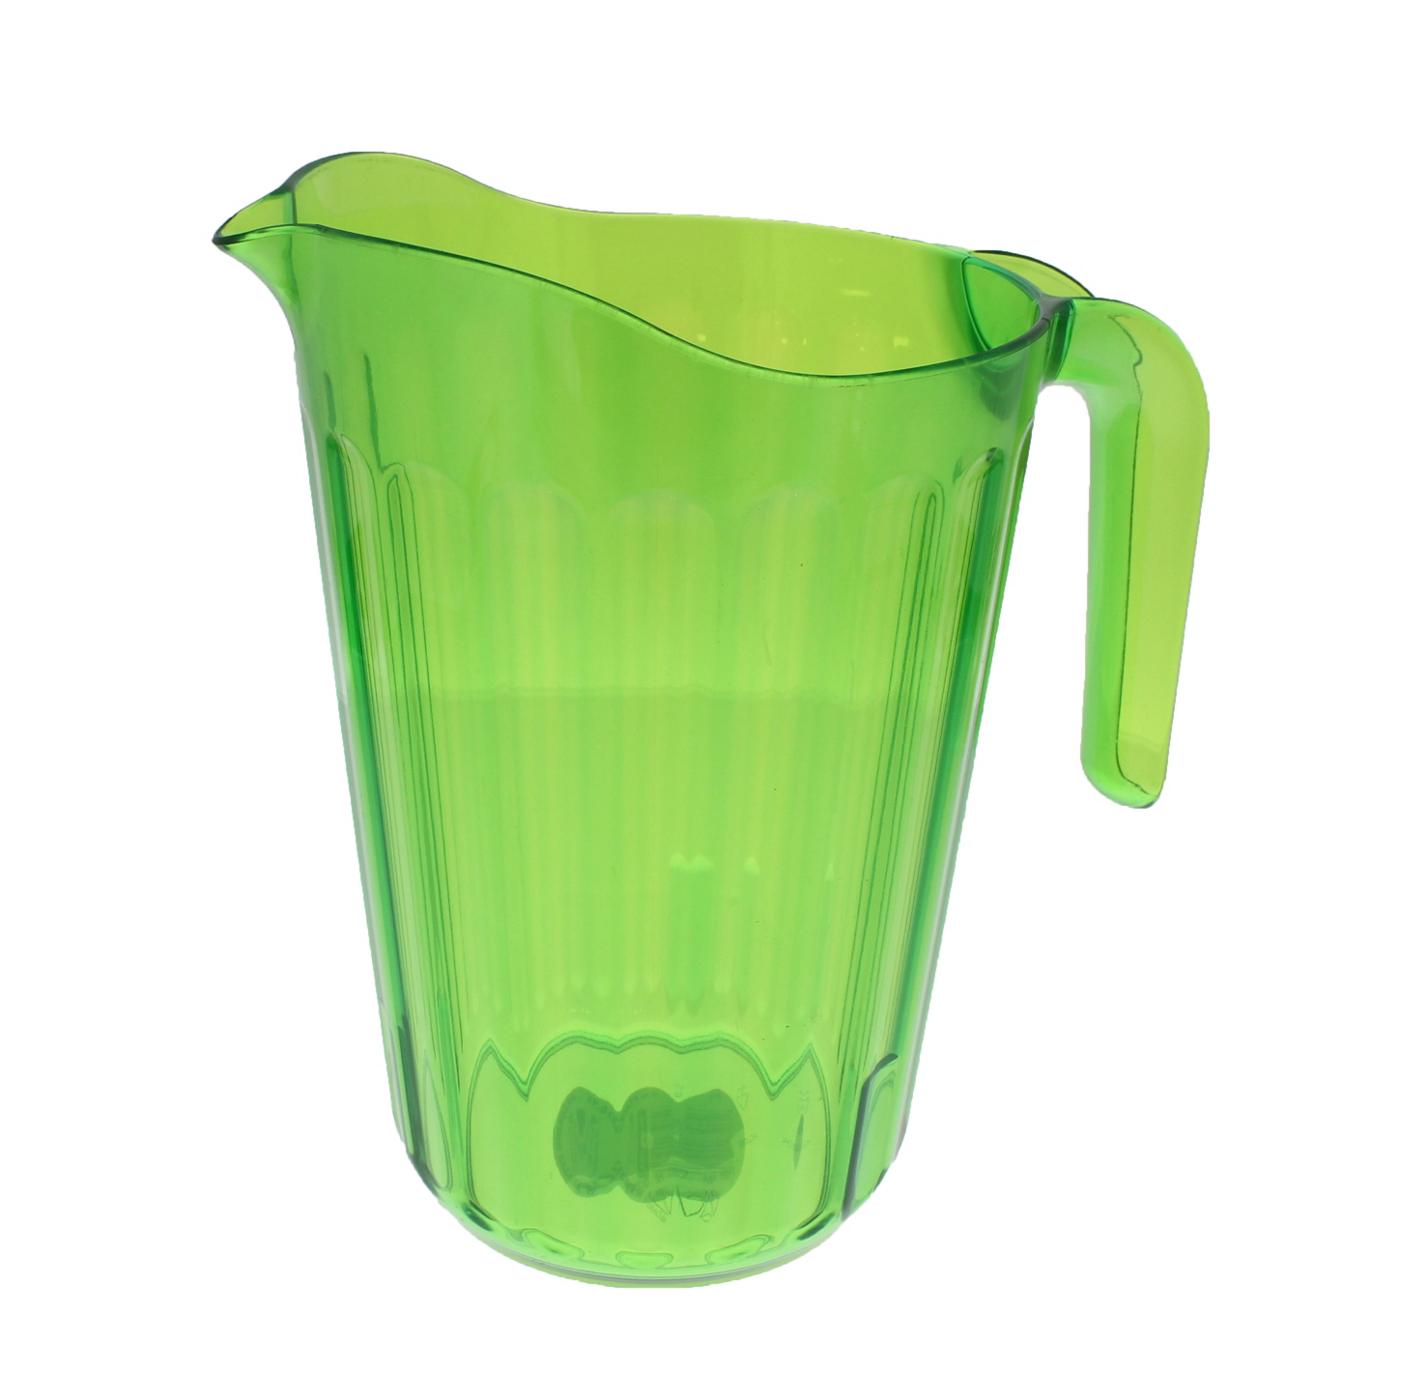 Arrow Plastic Stacking Pitcher, Colors May Vary; image 3 of 3